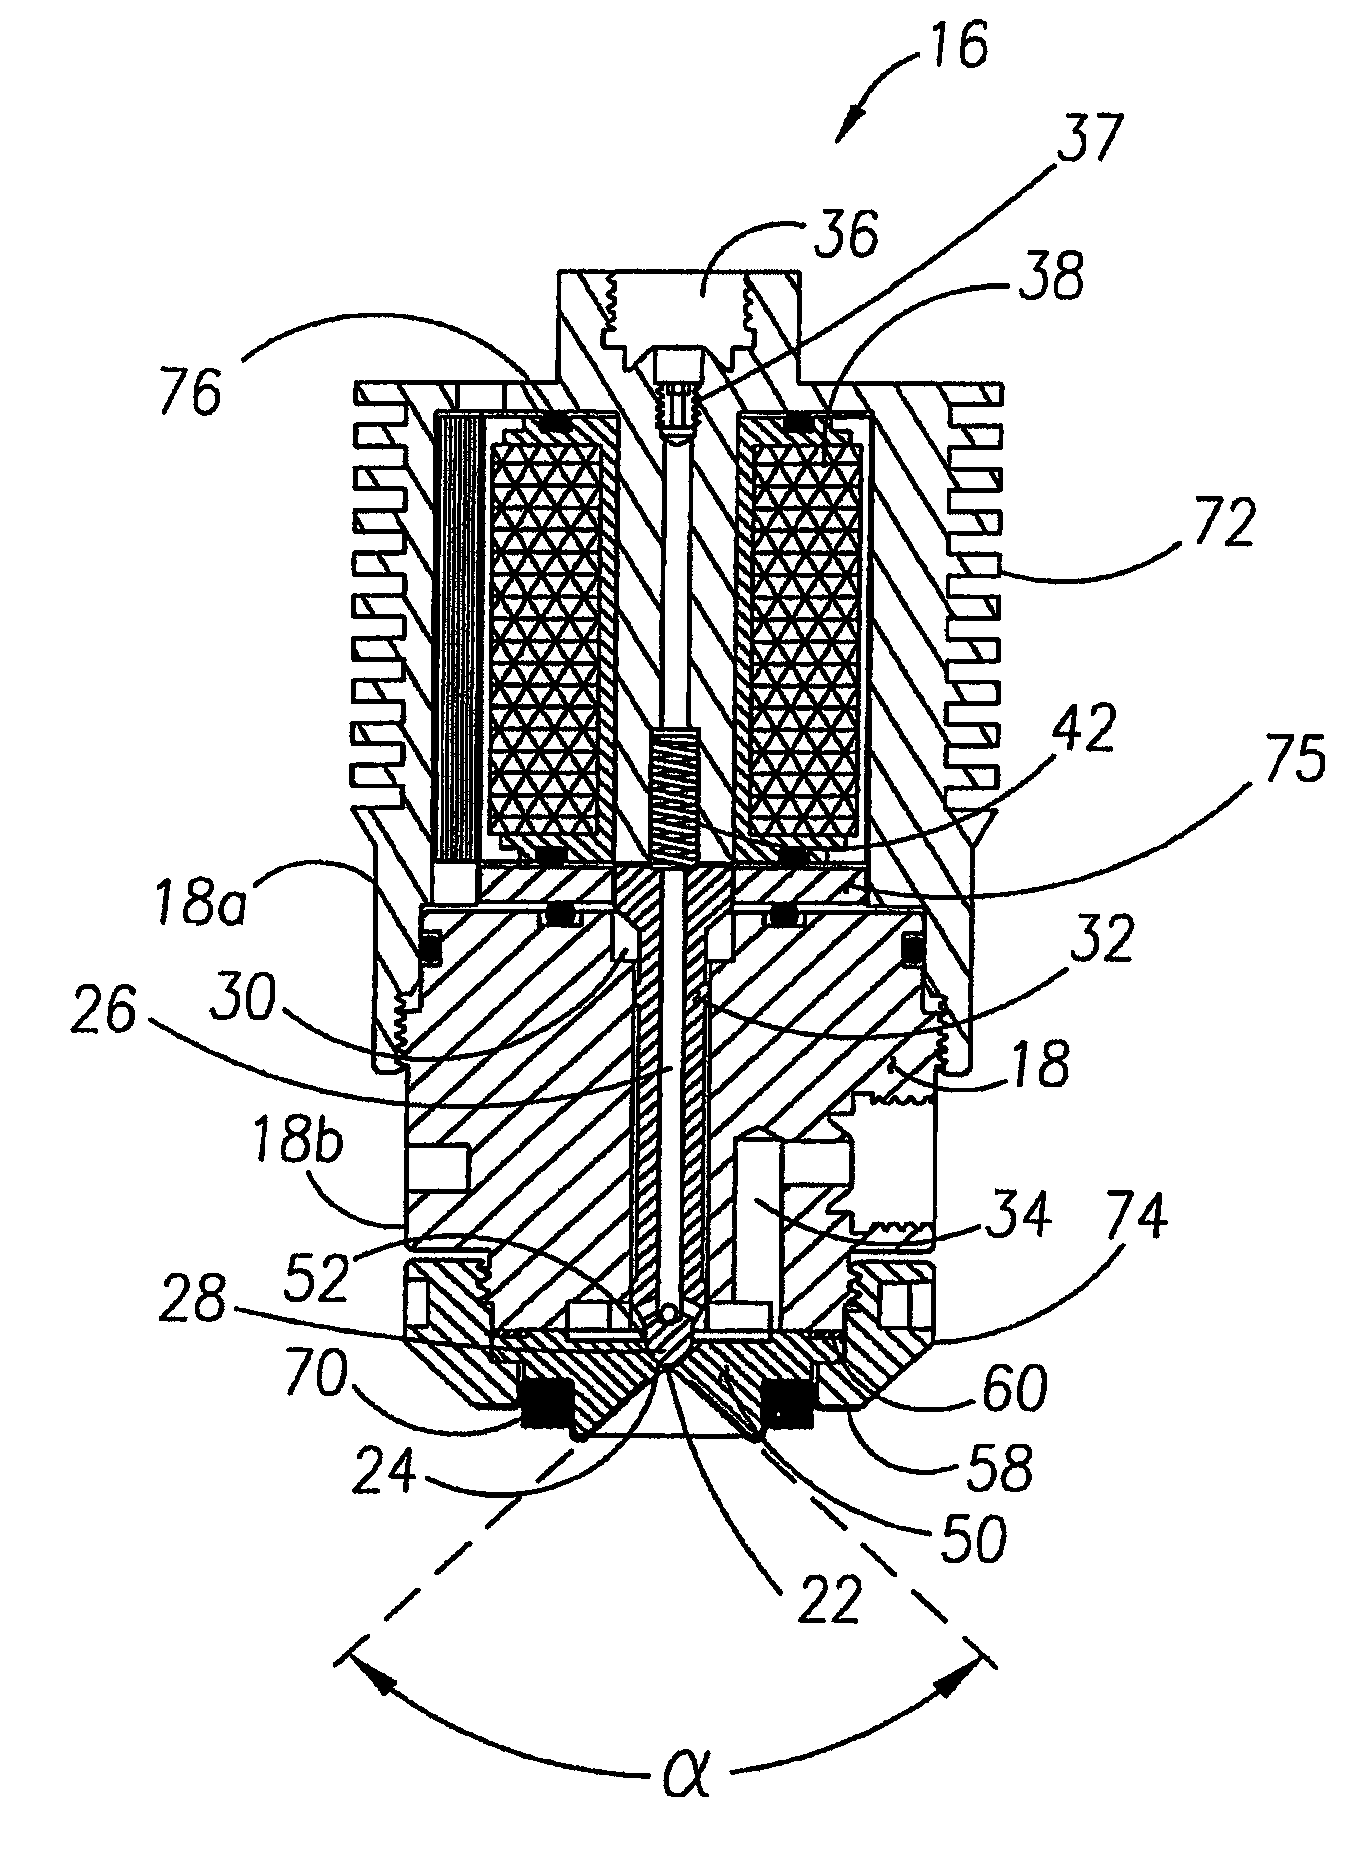 Method and apparatus for injecting atomized fluids